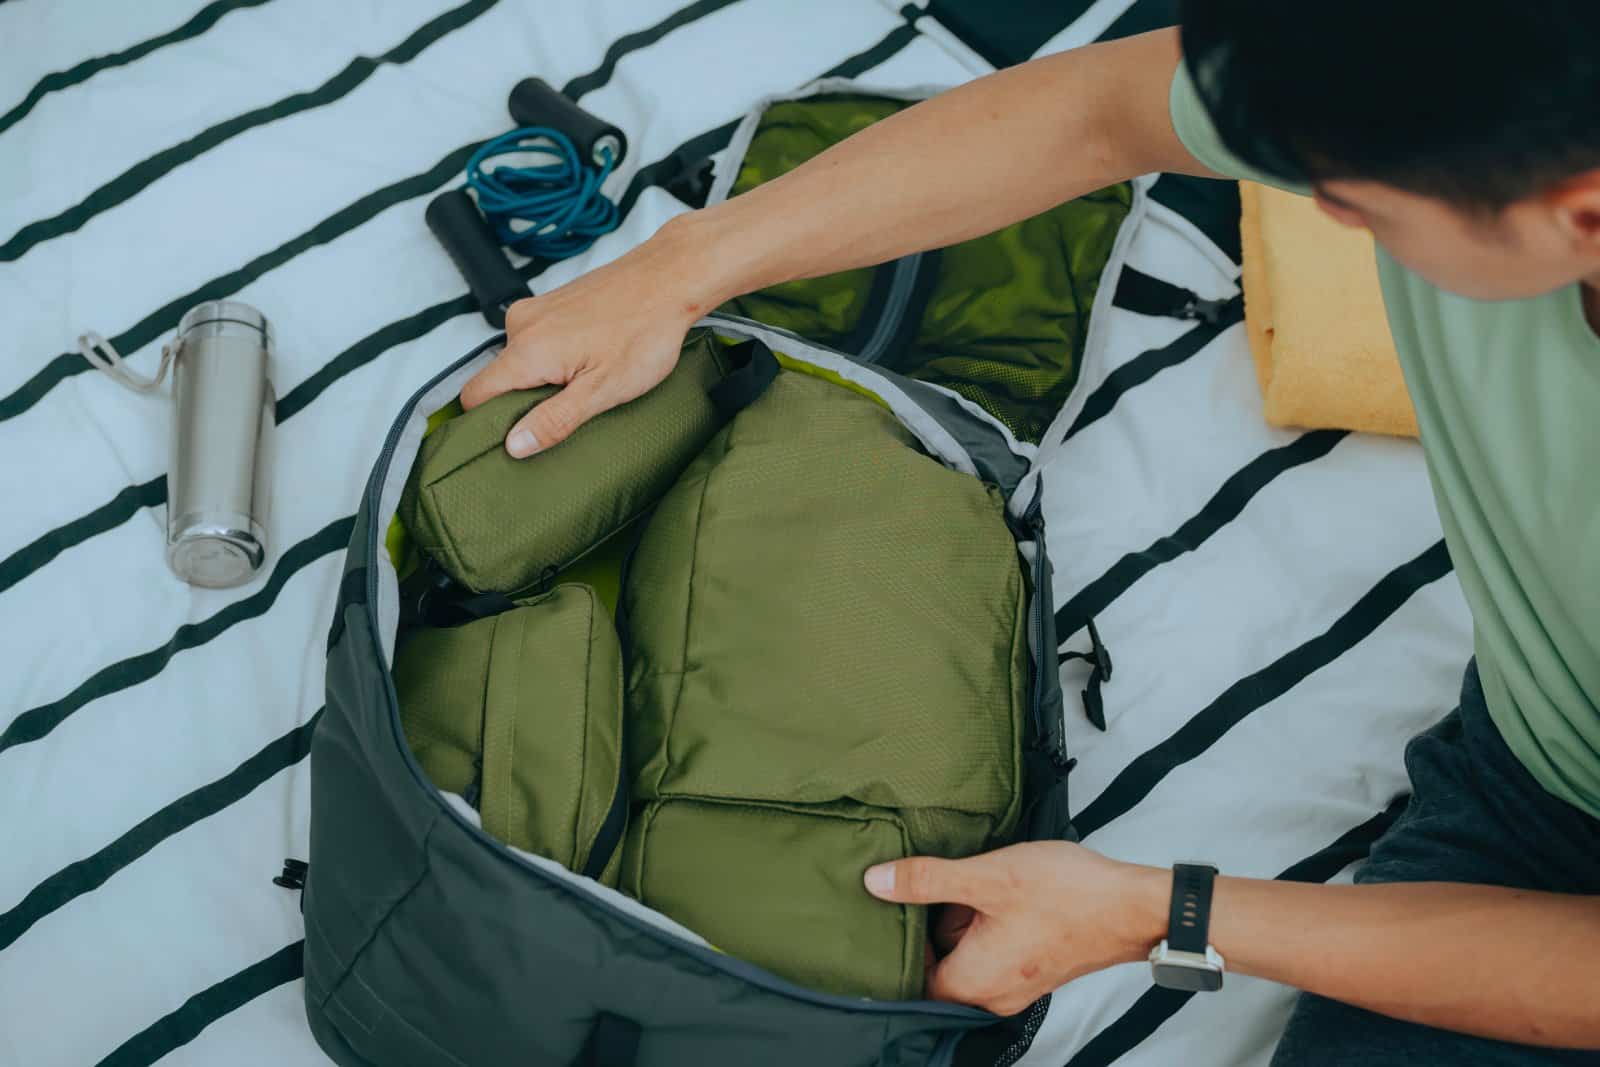 <p class="wp-caption-text">Image Credit: Shutterstock / Febriandi Dimas Wara</p>  <p><span>Packing for a cycling tour is an exercise in balance and foresight, requiring you to be prepared for various scenarios while keeping your load manageable. Essential items include cycling clothing for all weather conditions, a repair kit, spare tubes, and personal items like sunscreen and medications.</span></p> <p><span>Opt for lightweight, versatile gear that can serve multiple purposes, and organize your belongings to make them easily accessible. Remember, every extra pound can make a difference during long climbs and long days in the saddle.</span></p> <p><span>Additionally, consider the environmental impact of your choices, opting for reusable water bottles and eco-friendly products whenever possible. Thoughtful packing will ensure you have everything you need without being weighed down, allowing you to focus on the joy of the ride.</span></p> <p><b>Insider’s Tip: </b><span>Use packing cubes or bags to organize your gear by category (e.g., clothes, tools, personal care), making it easier to find what you need without unpacking everything.</span></p>